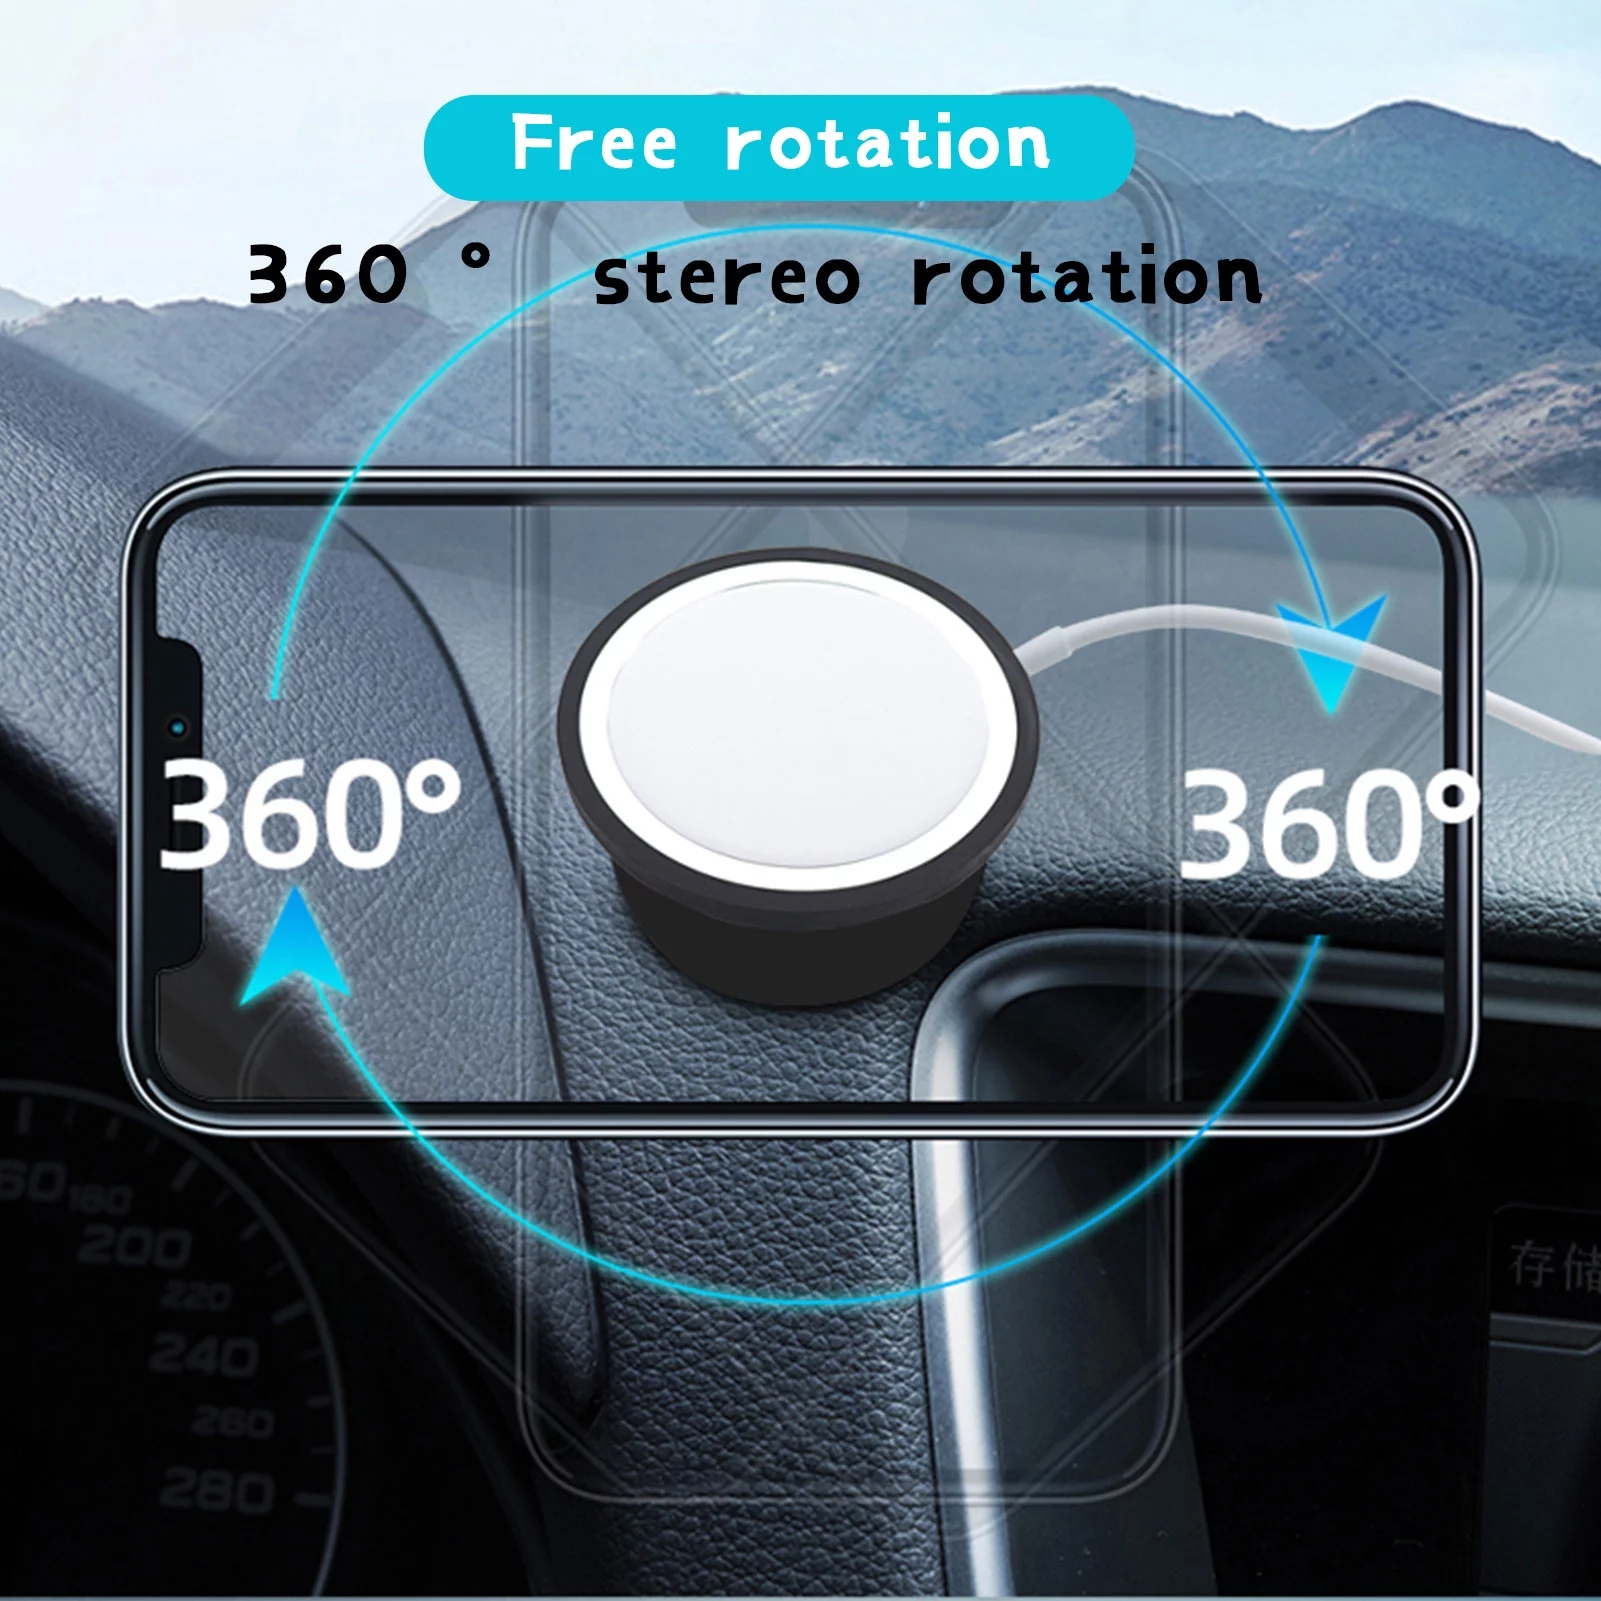 Bakeey-MagSafe-Wireless-Charger-360deg-Rotation-Adjustable-Car-Air-Vent--Dashboard-Holder-Phone-Stan-1785494-2